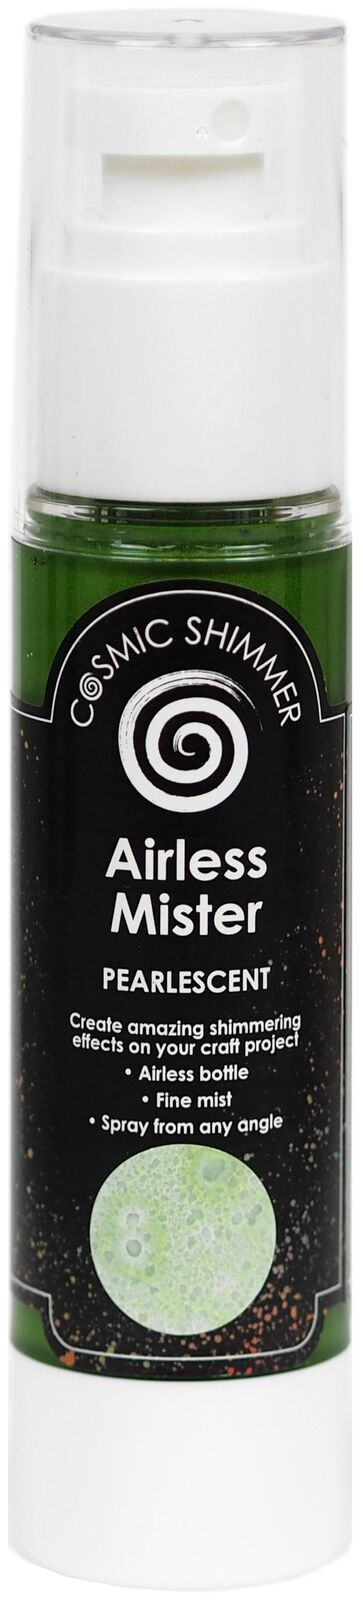 Cosmic Shimmer Pearlescent Airless Mister 50ml-Kiwi Twist, 3 Pack